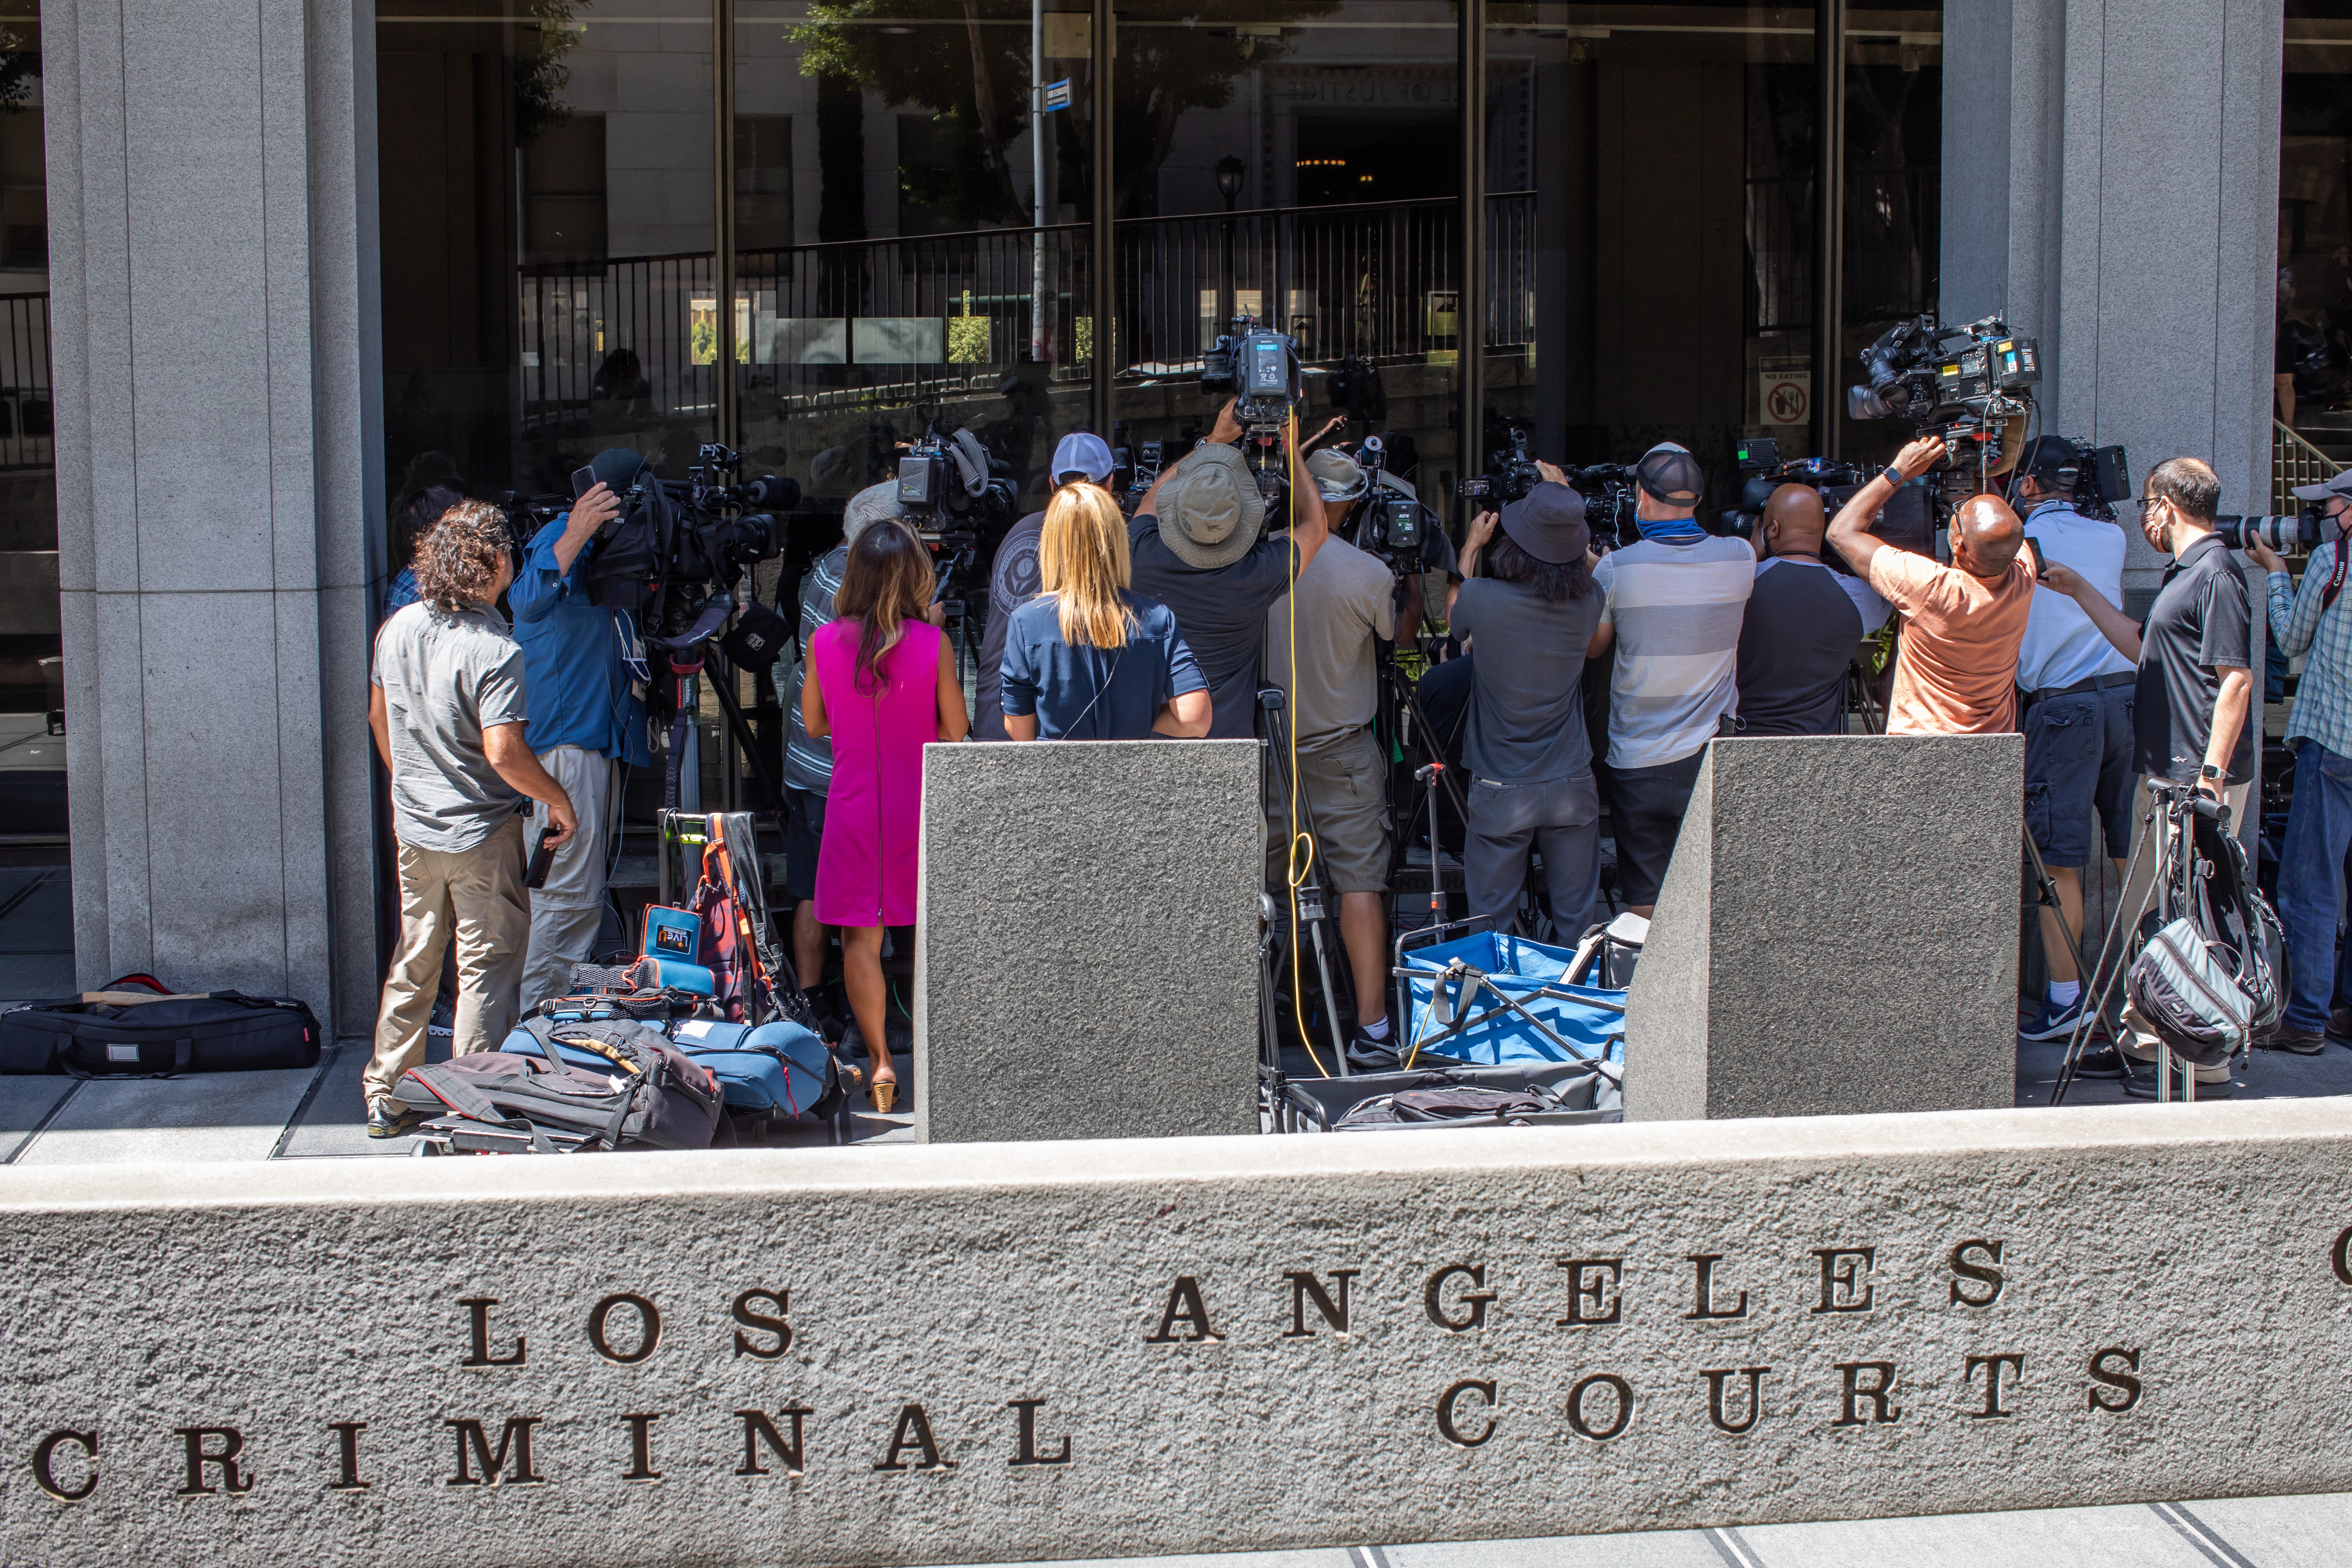 Journalists gather around attorney Gloria Allred at the Clara Shortridge Foltz Criminal Justice Center during the arraignment of former Hollywood producer Harvey Weinstein on 21 July 2021 in Los Angeles, California